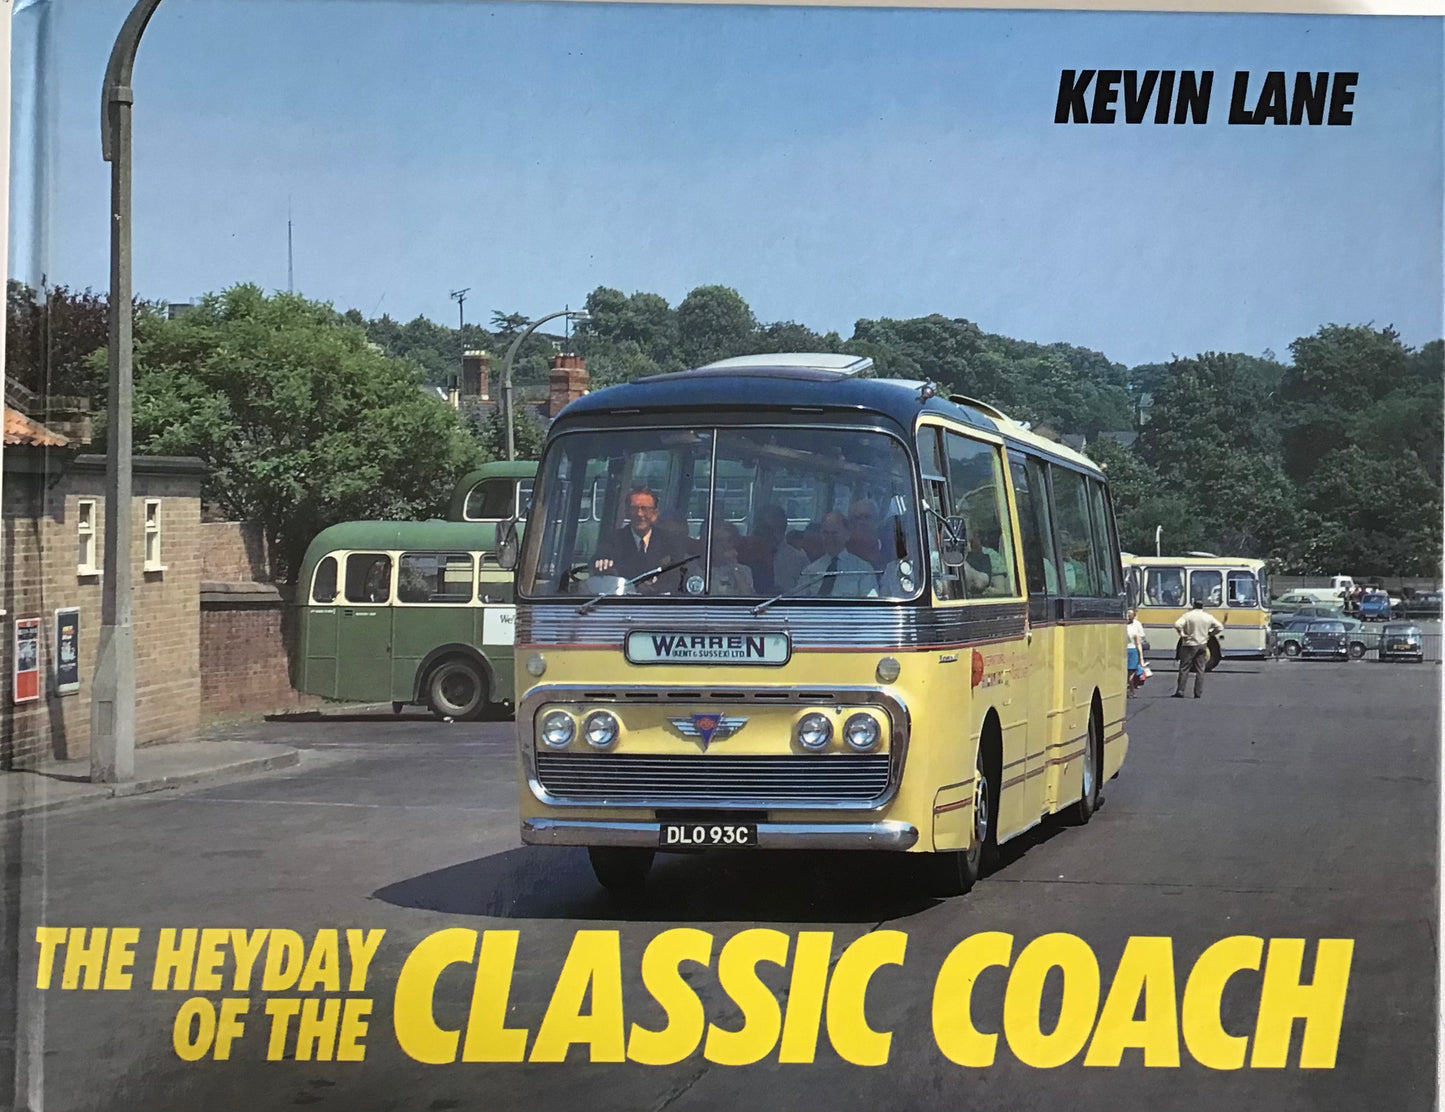 The Heyday of the Classic Coach - Kevin Lane - Chester Model Centre